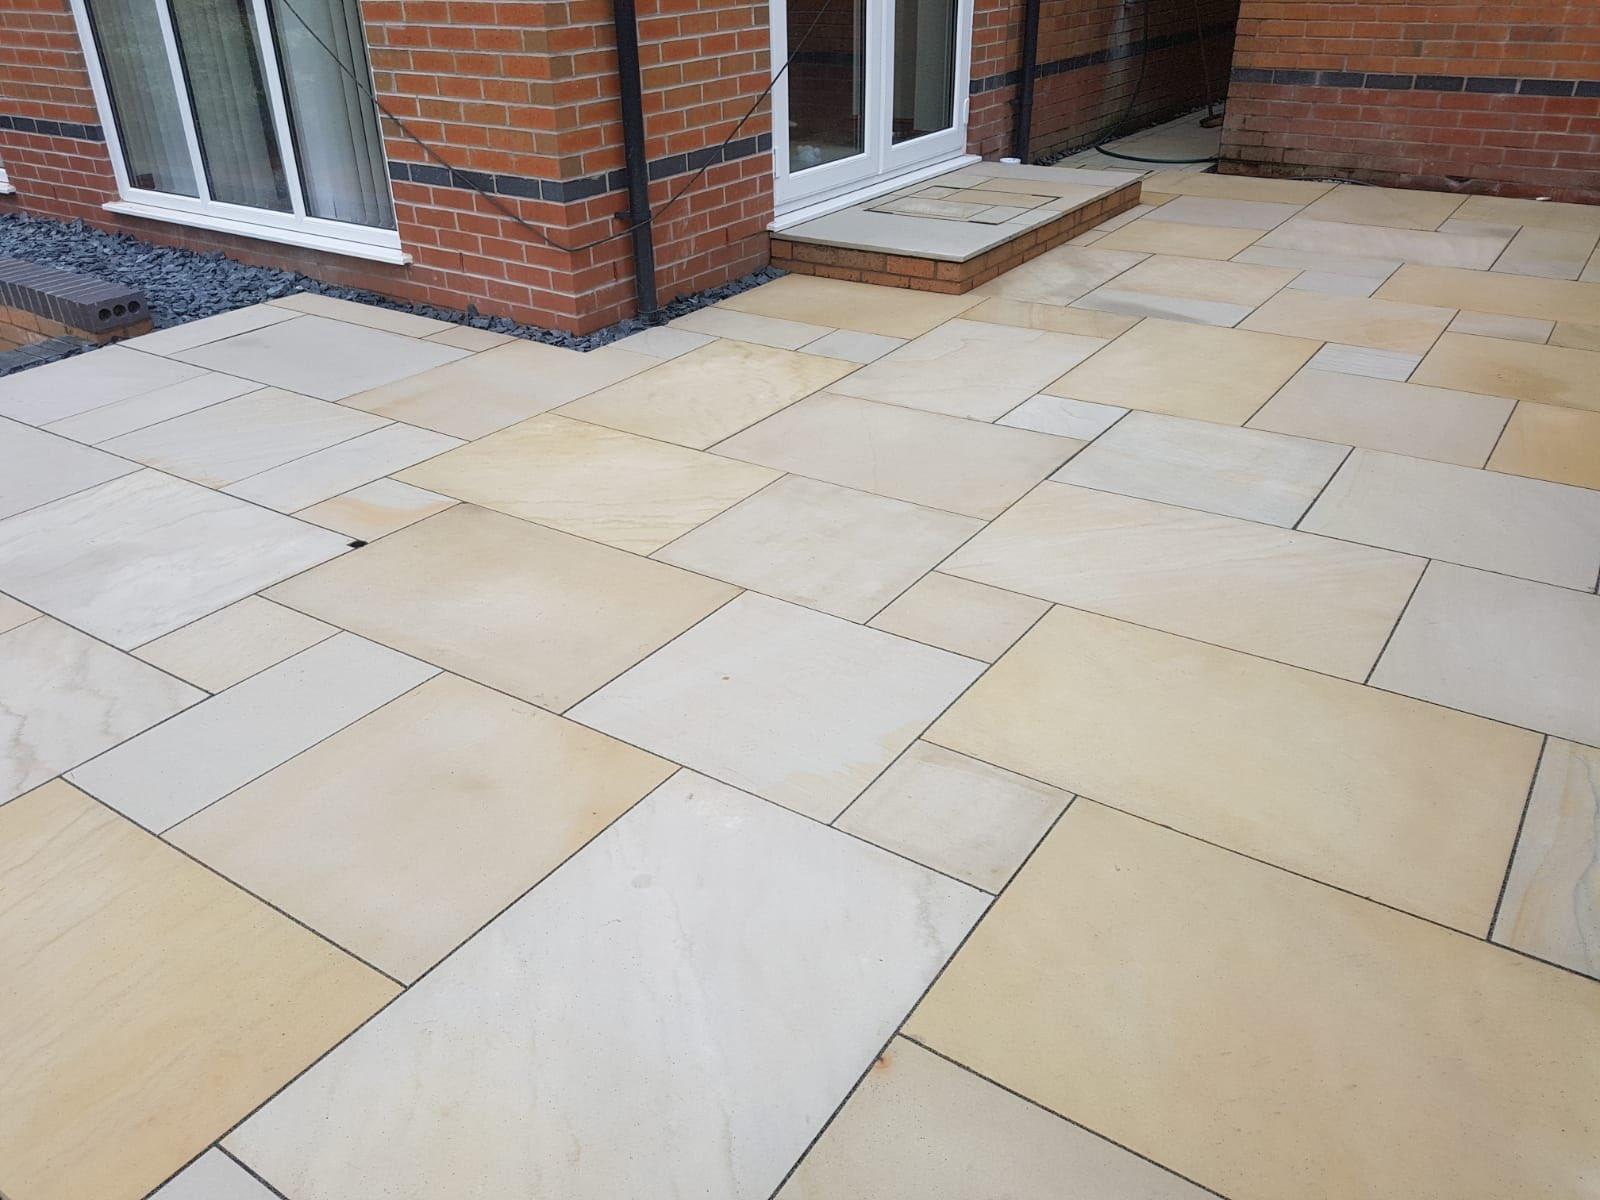 Fossil Mint Indian Sandstone Paving Slabs - Sawn & Honed - 900x600 - 20mm - Smooth Paving - UniversalPaving